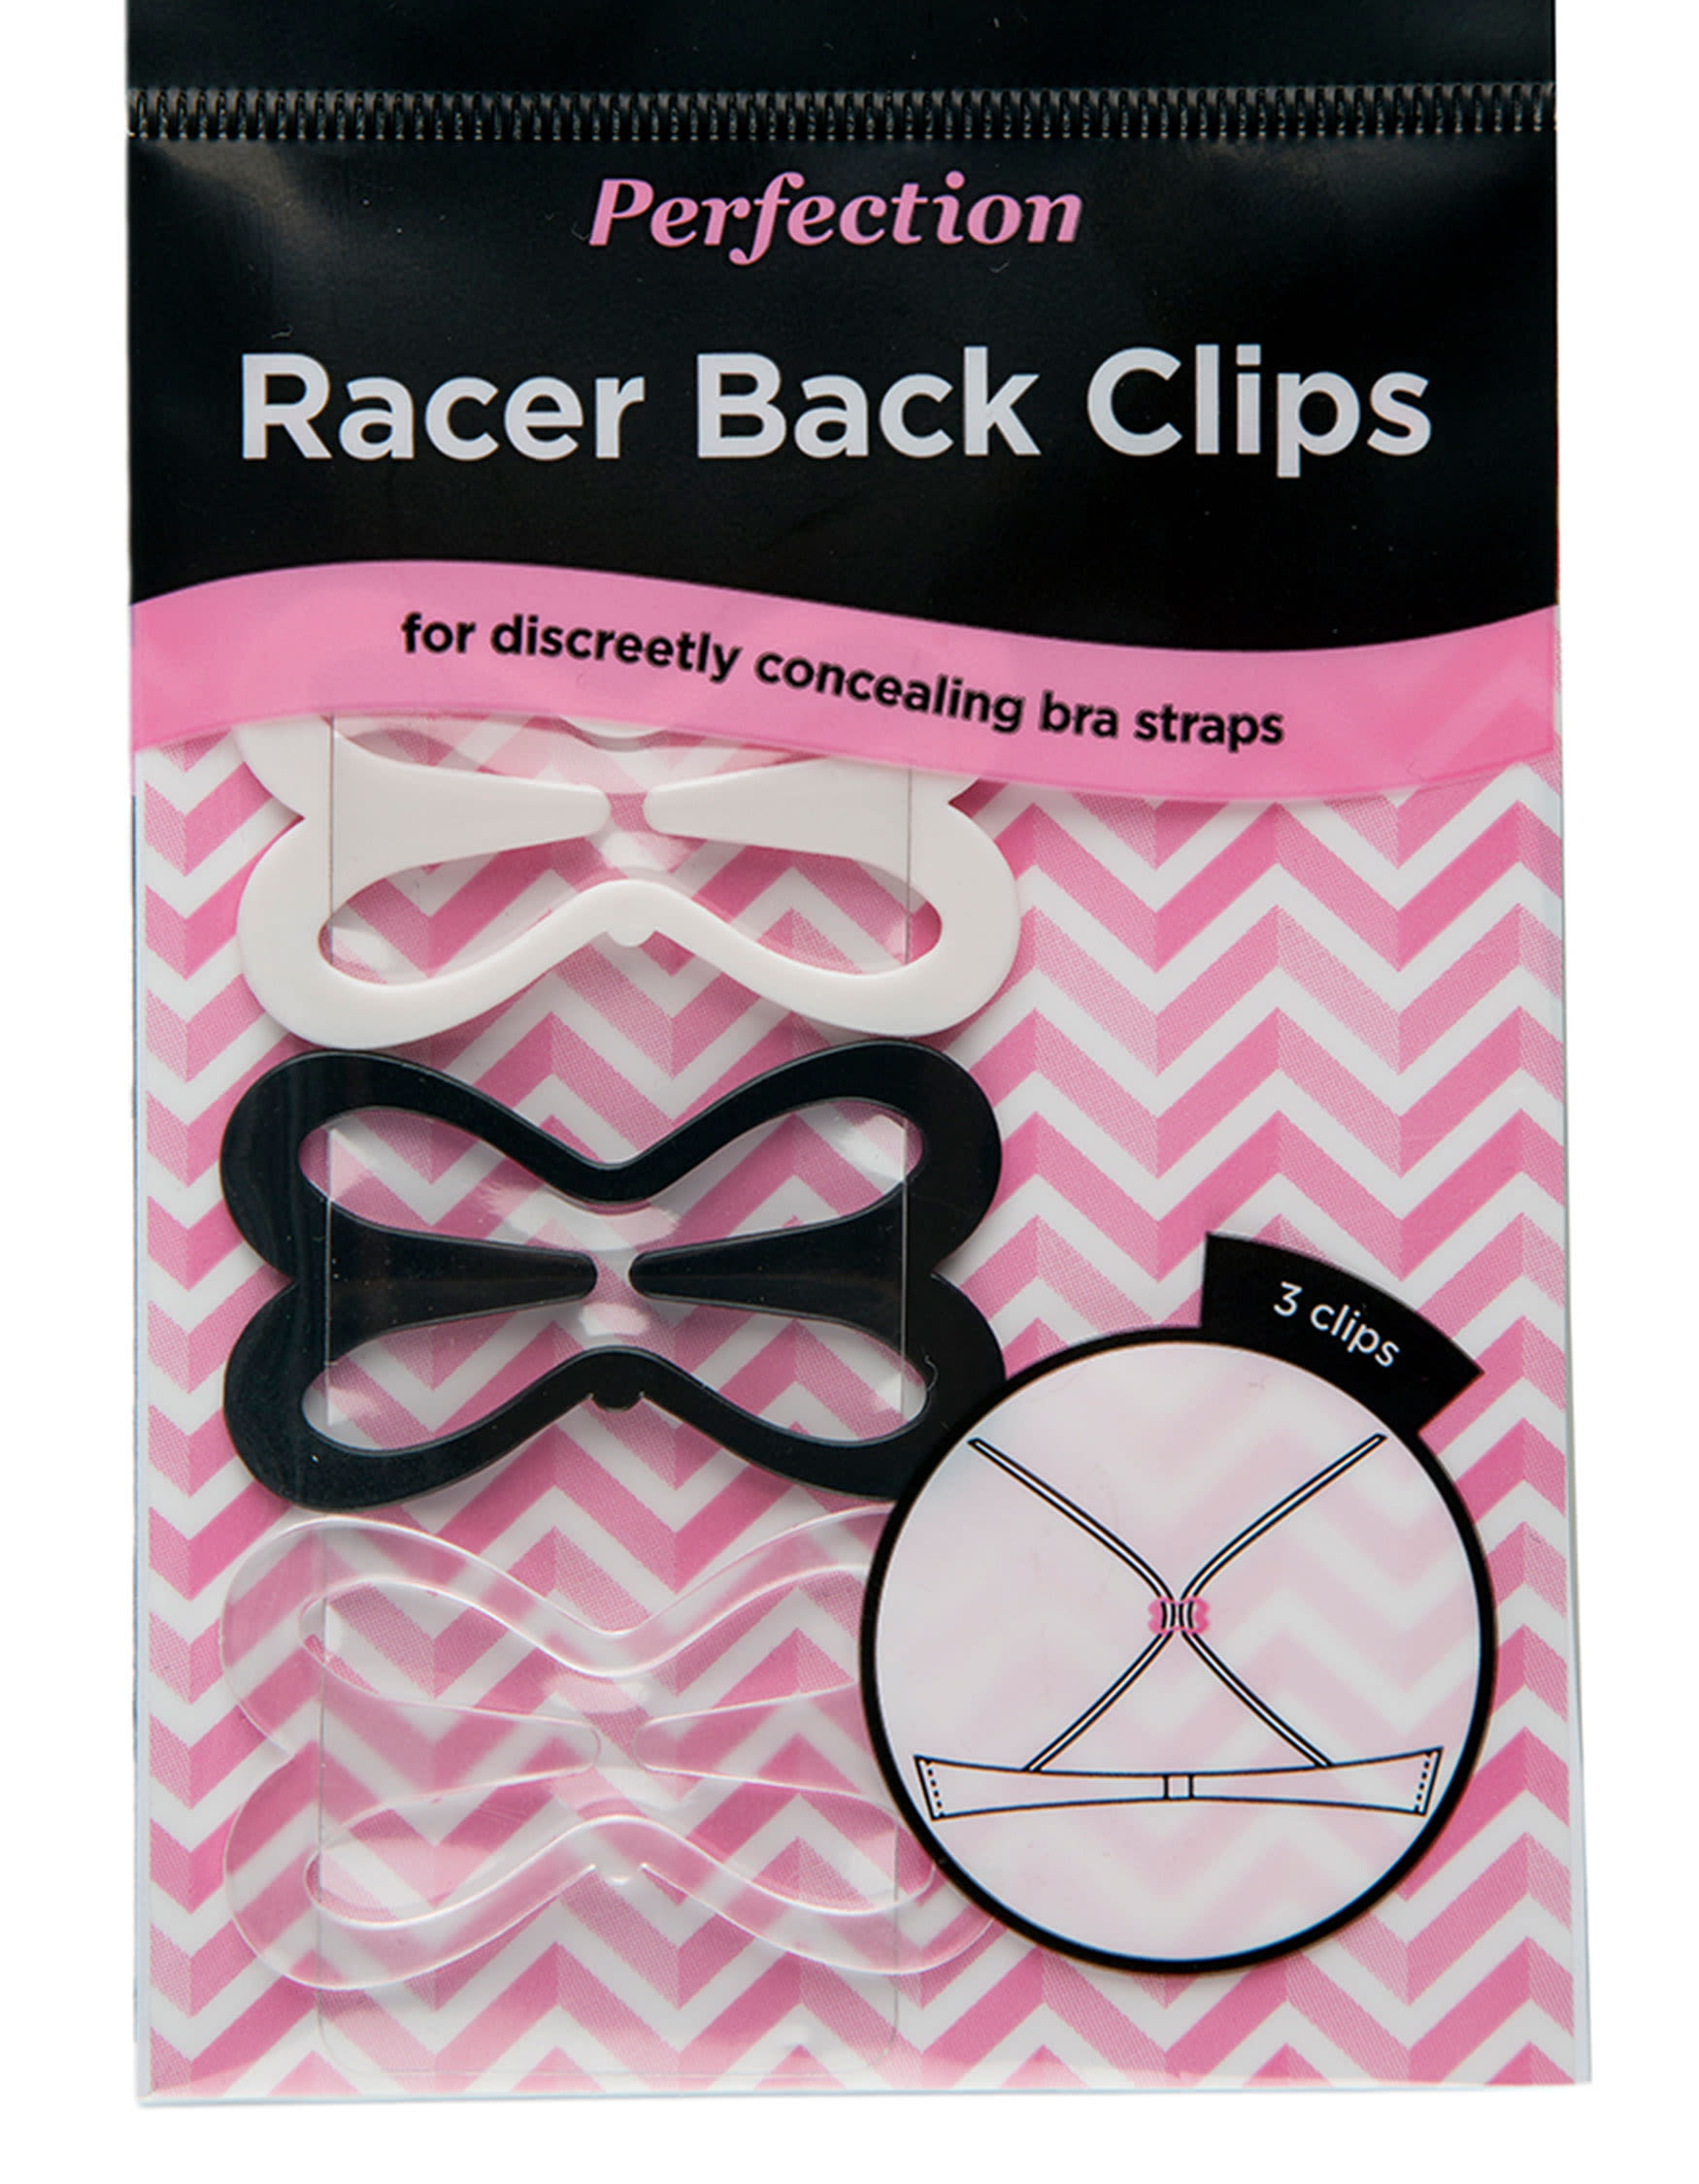 Racer Back Clips by Perfection, Other